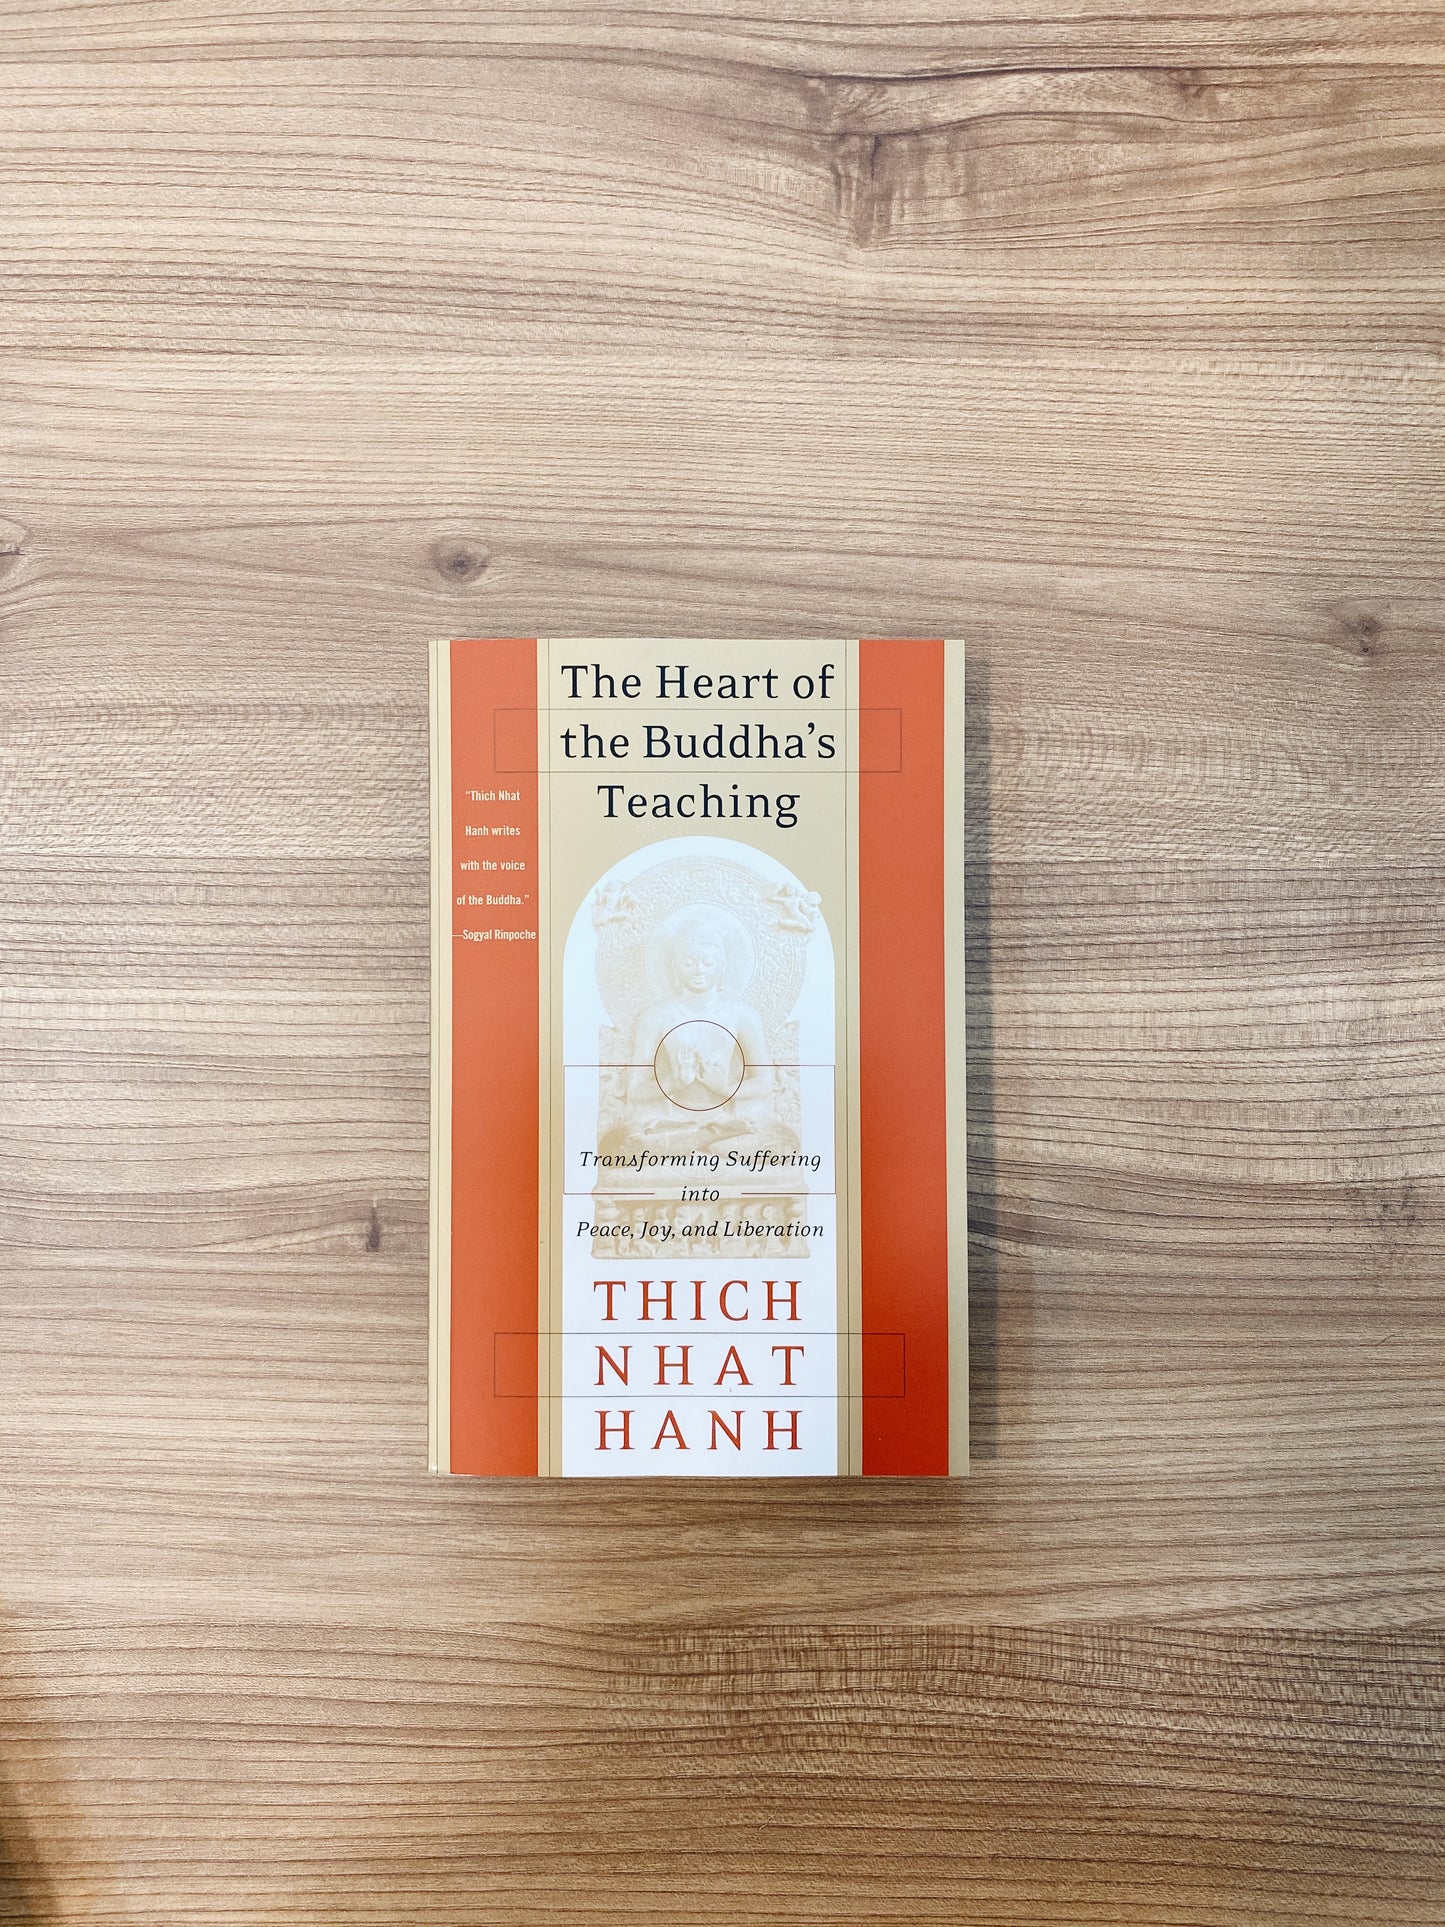 Thich Nhat Hanh - The Heart of the Buddha's Teaching : Transforming Suffering into Peace, Joy, and Liberation